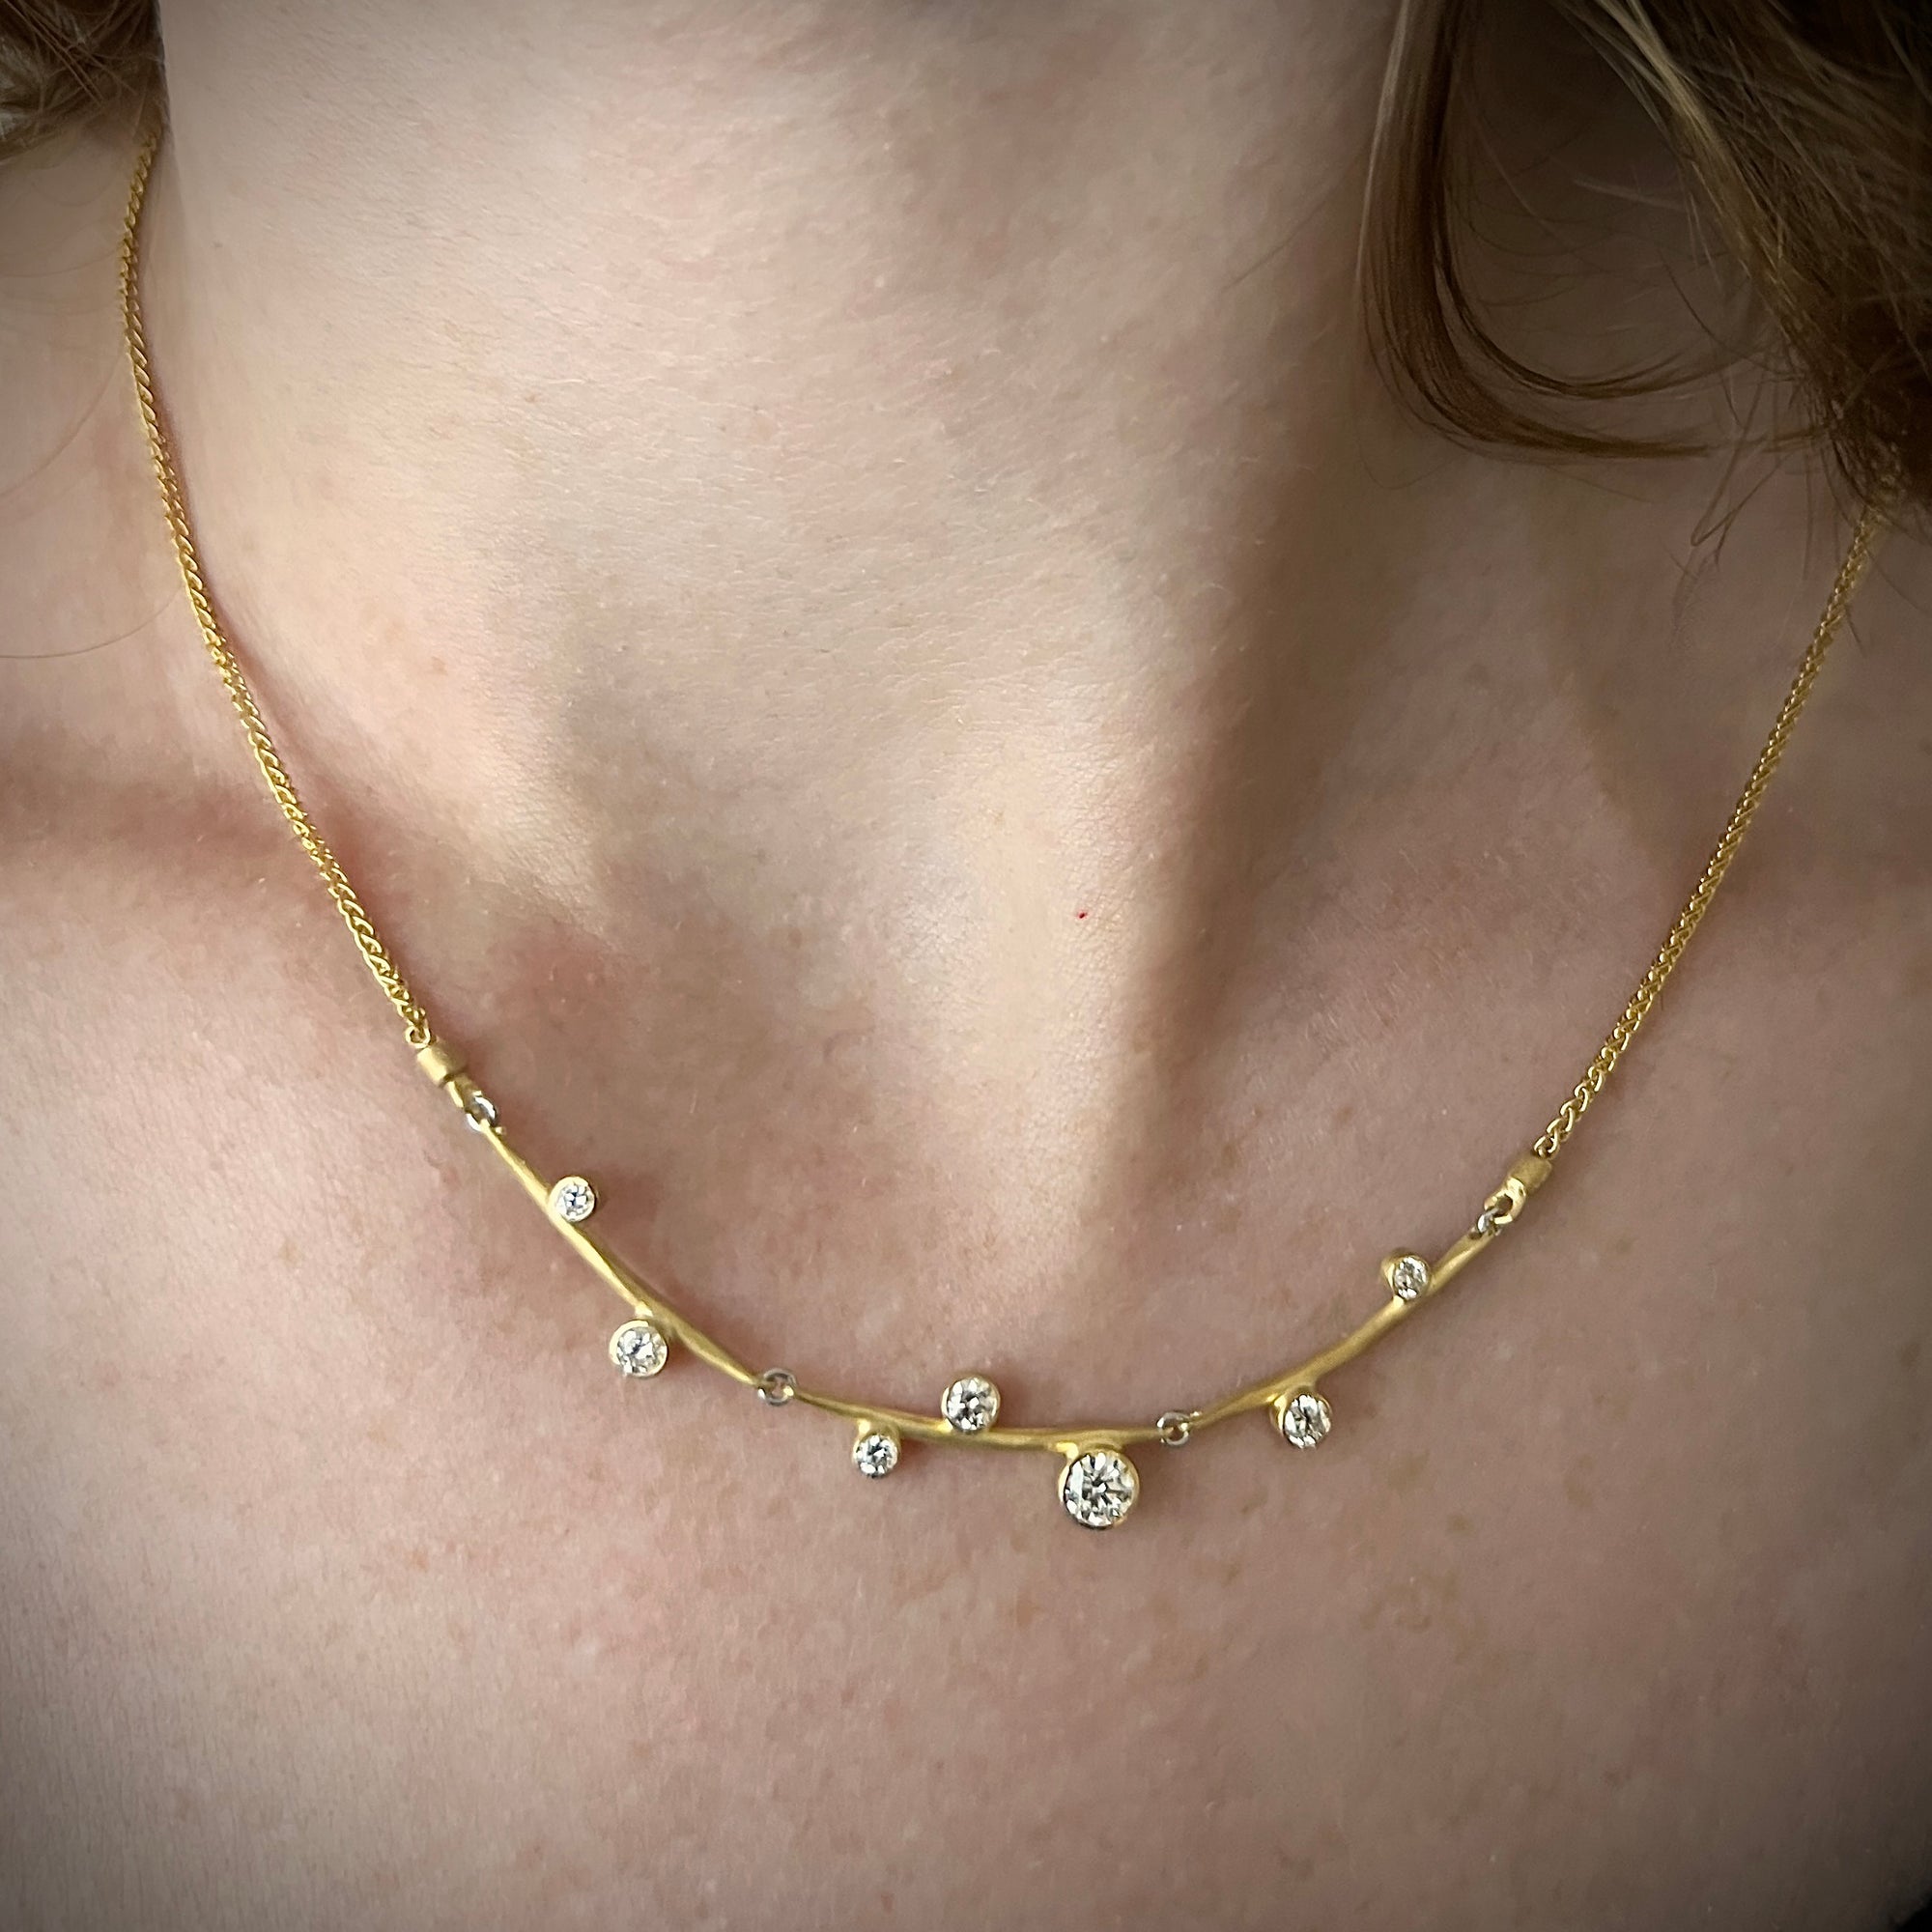 Three forged links with a stepped placing of diamonds form a flexible in-line pendant in 18KY gold made by Ayesha Mayadas